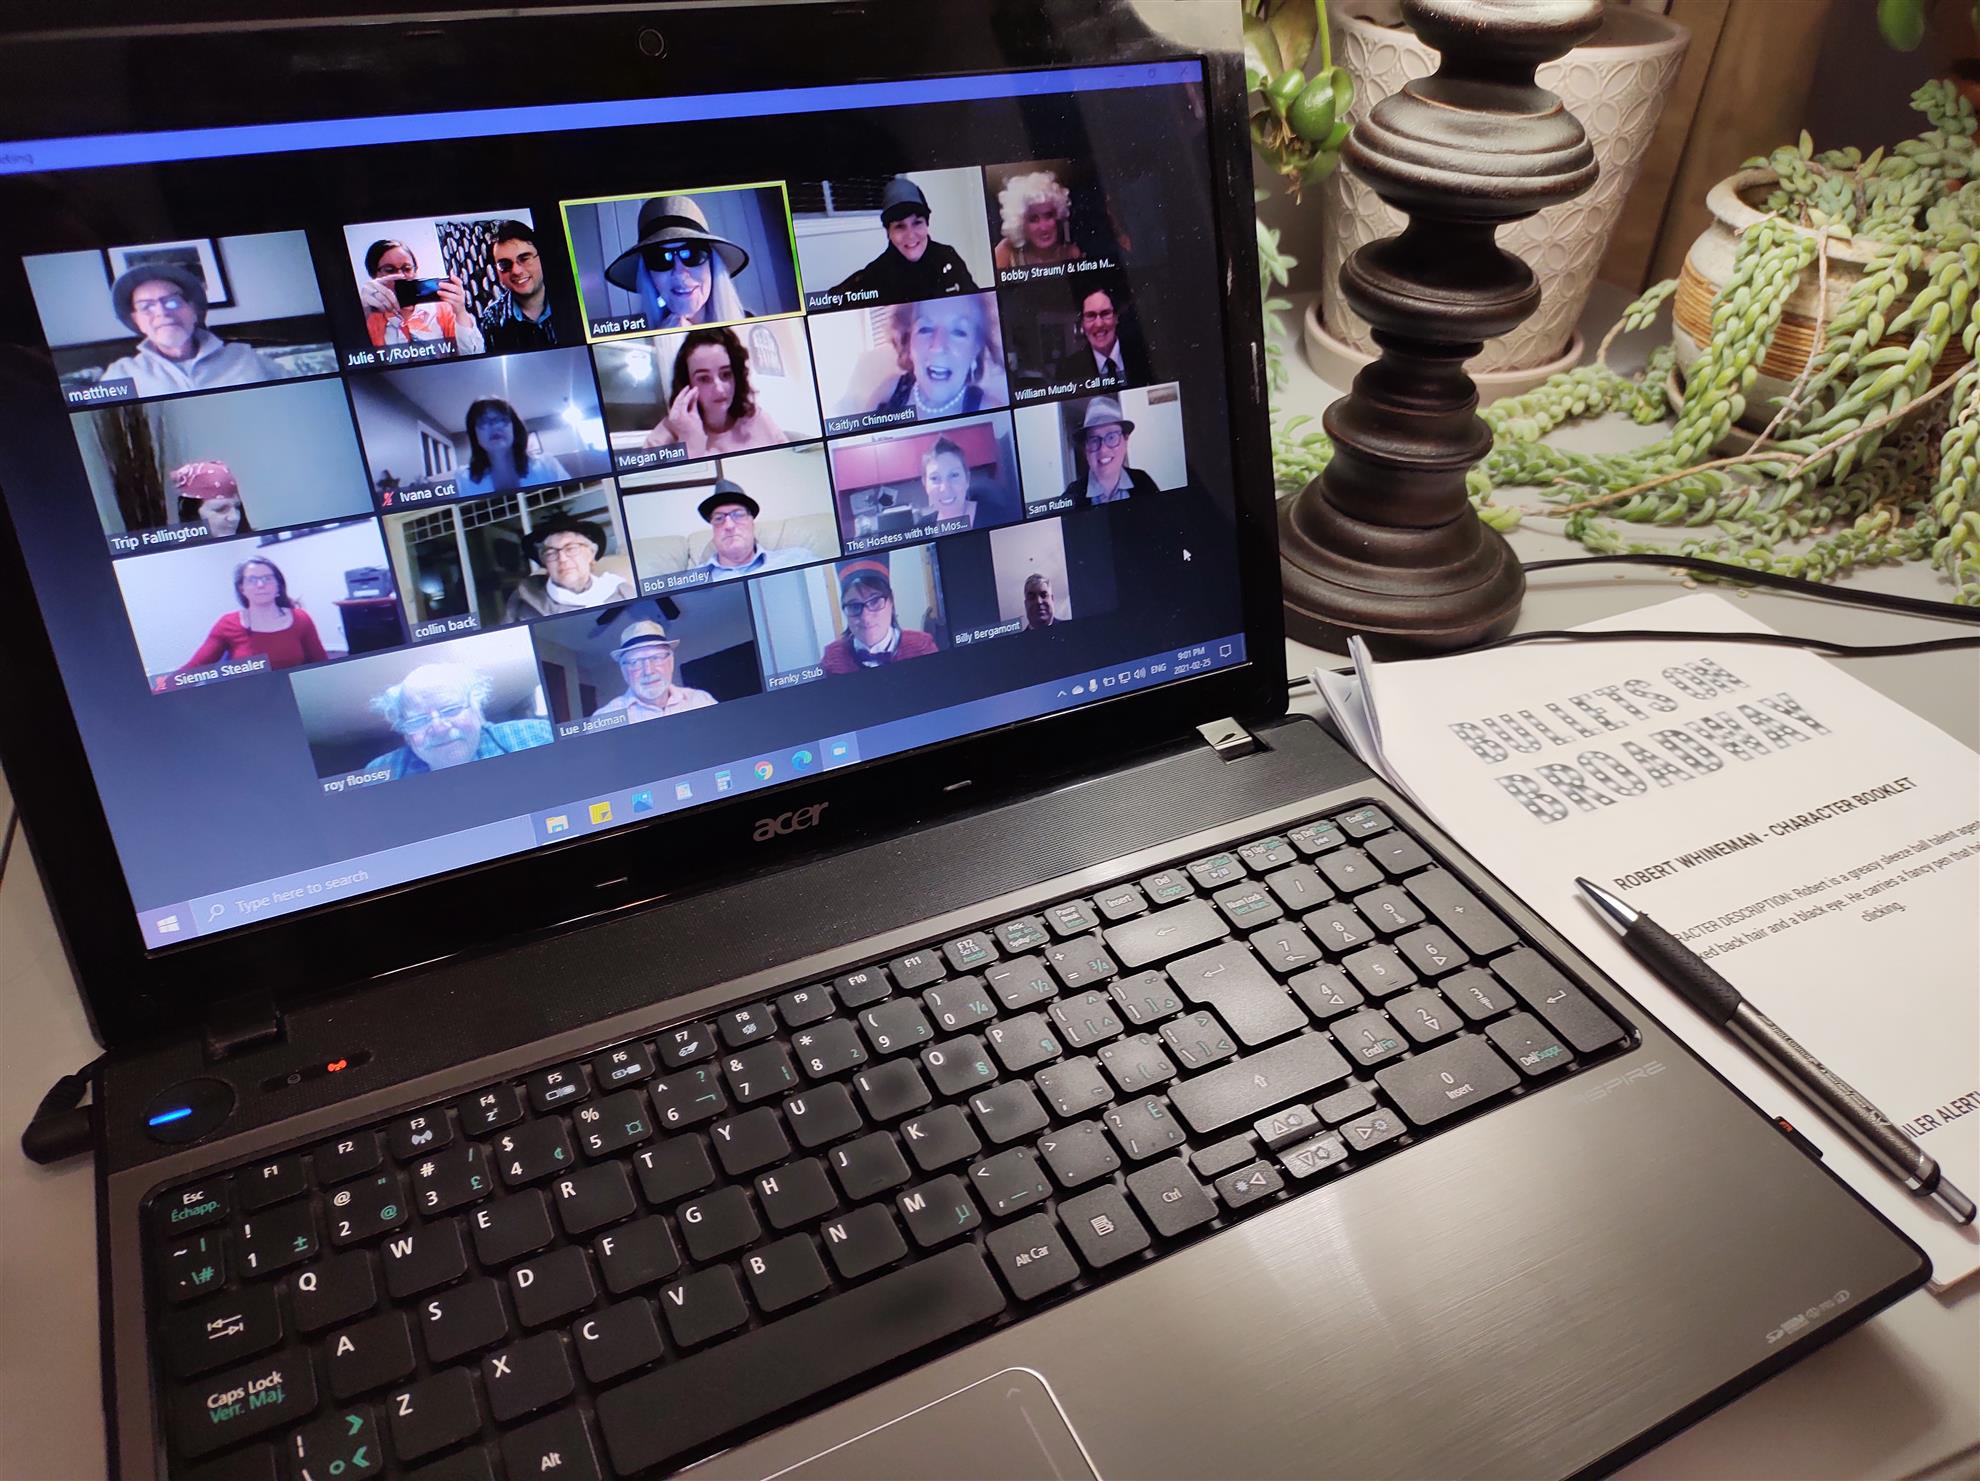 A photo of a laptop screen that displays a video conference of several people in costumes.